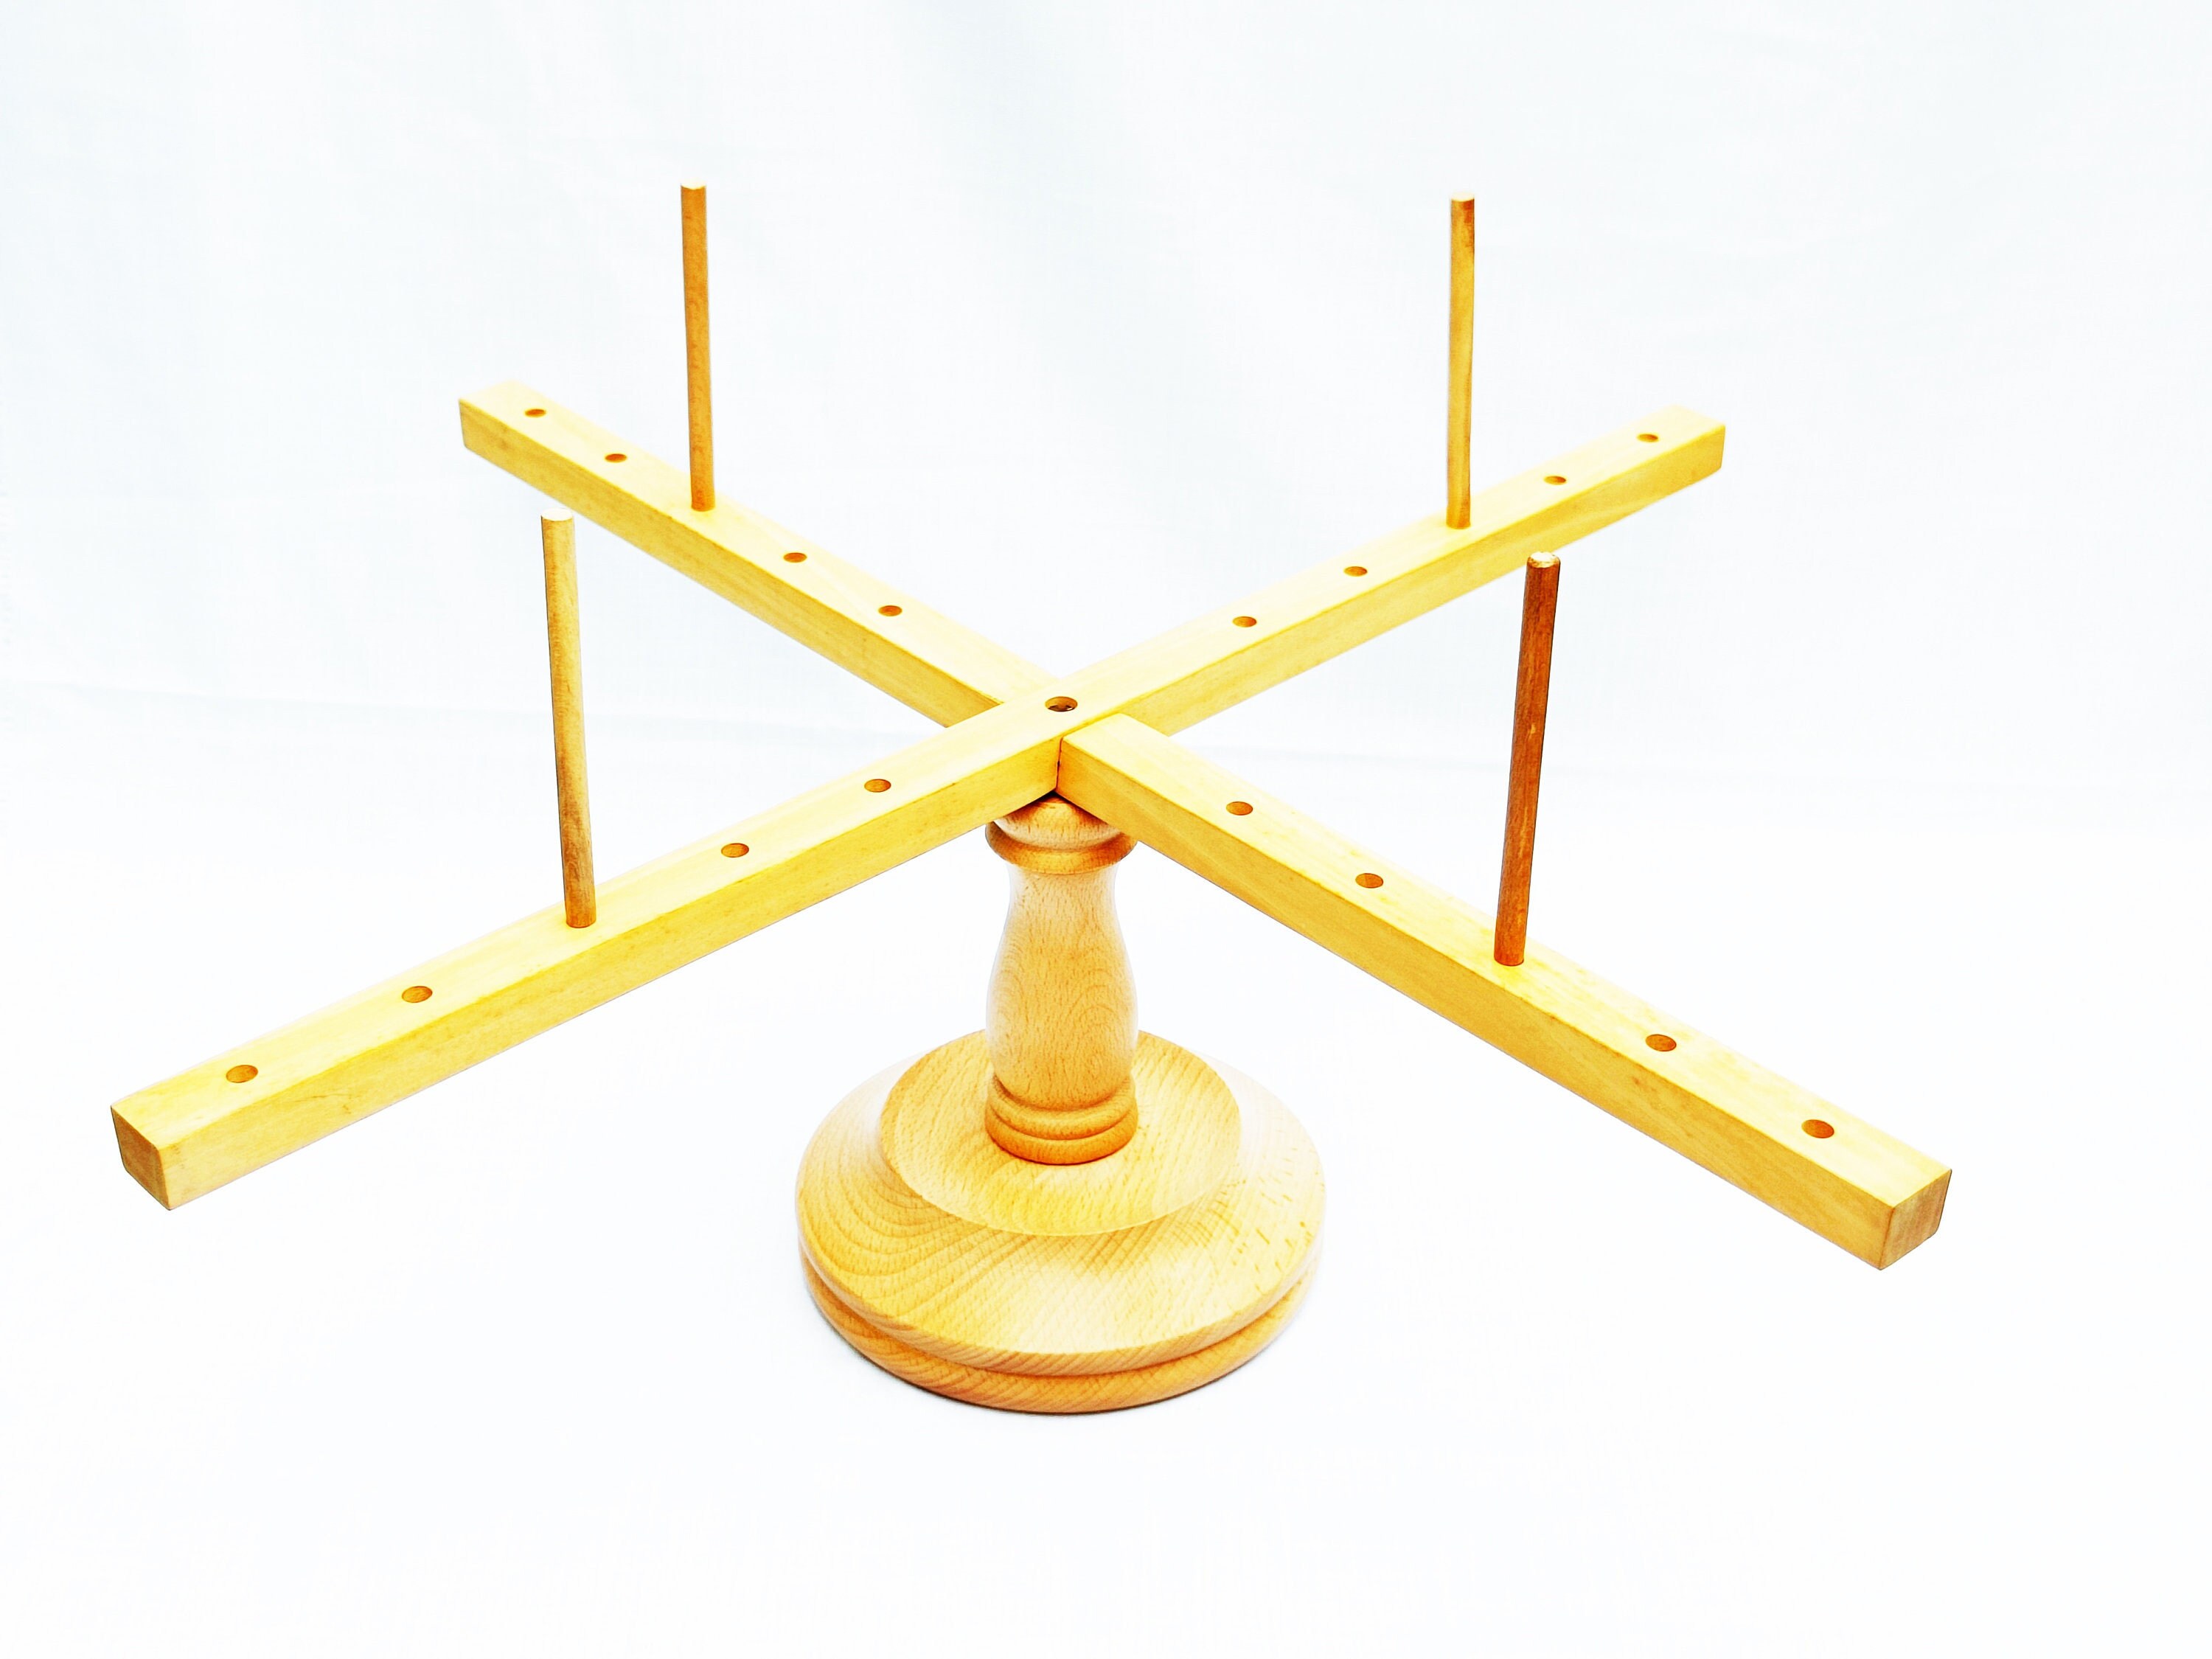 Holst Garn Other knitting tools (033) Yarn Swift Table Top Offer: $42.05